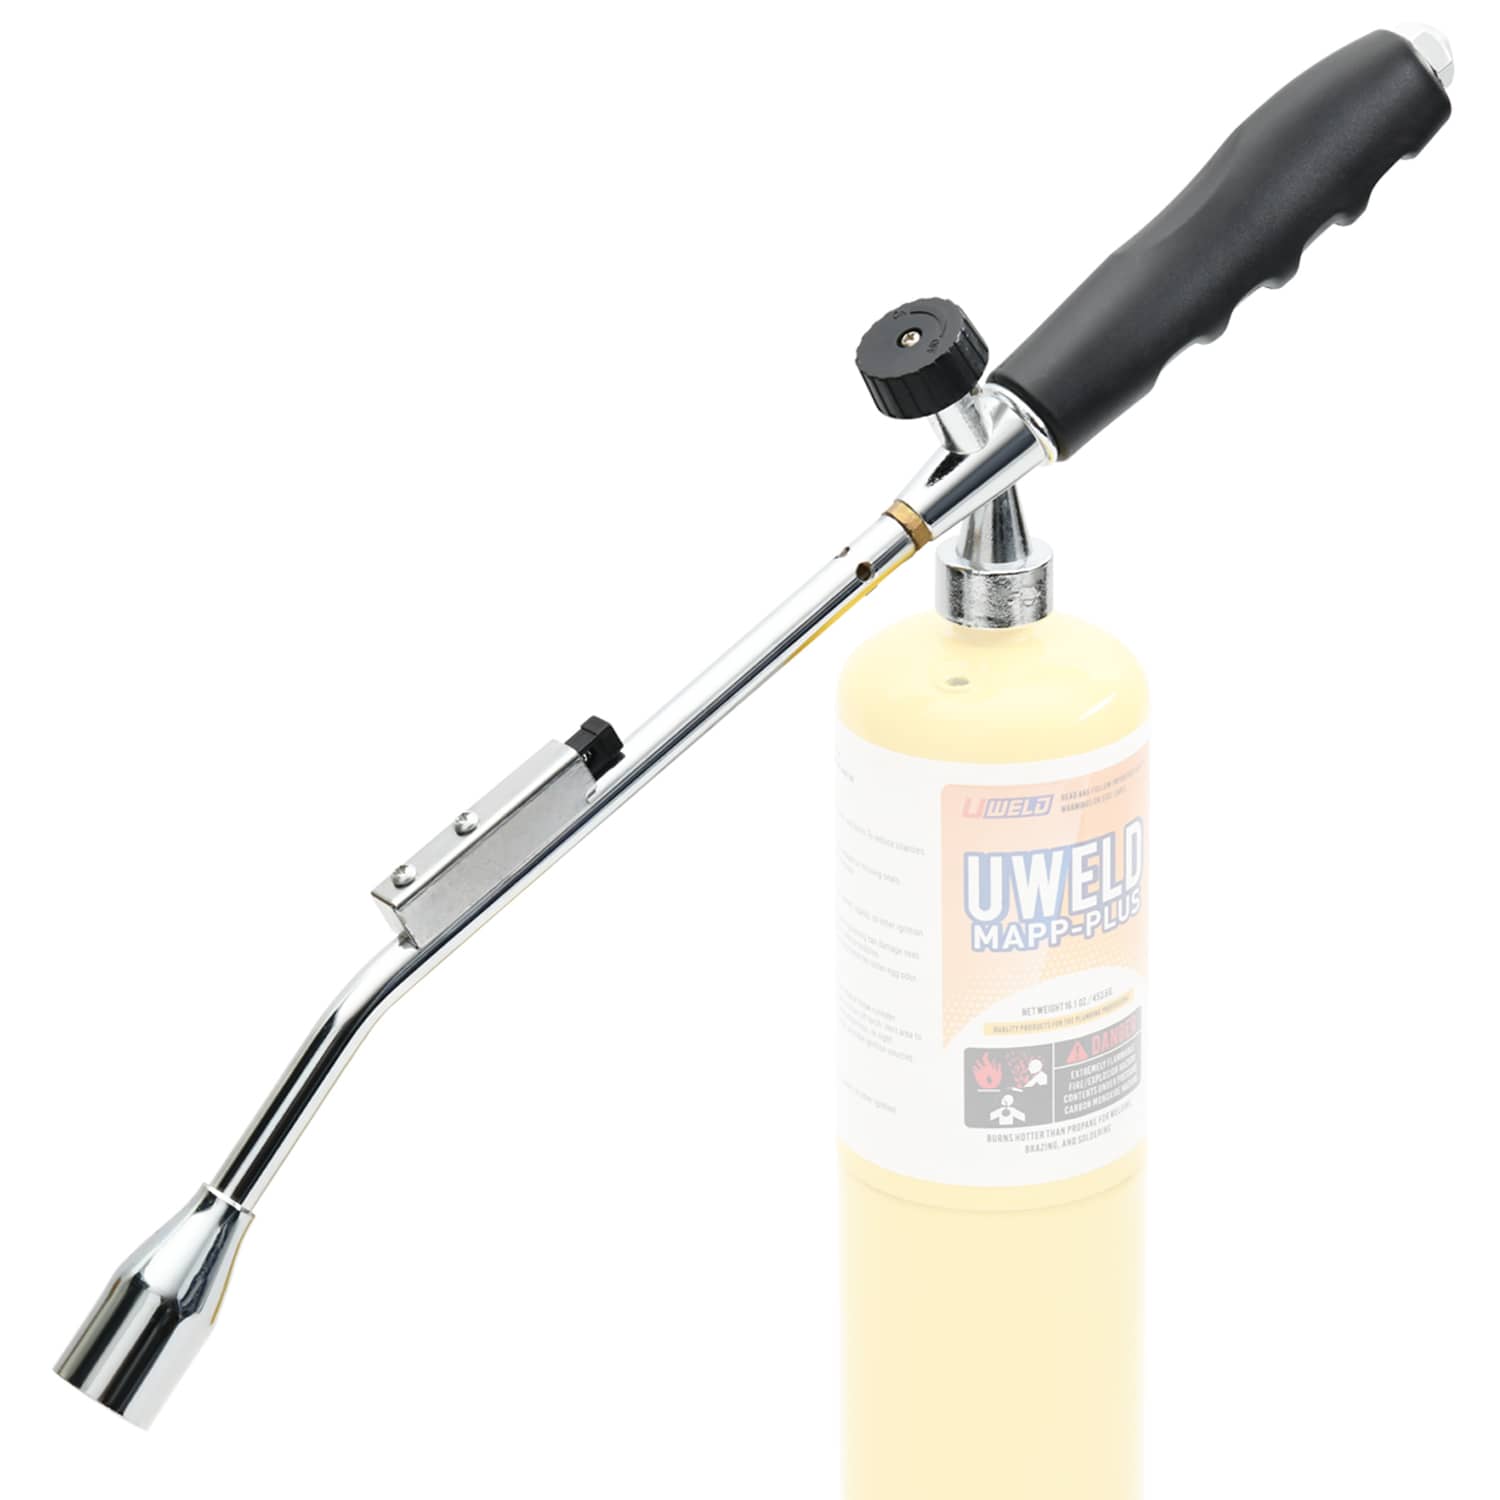 CAMPFIRE Powerful Grill Torch Charcoal Starter,Propane Torch